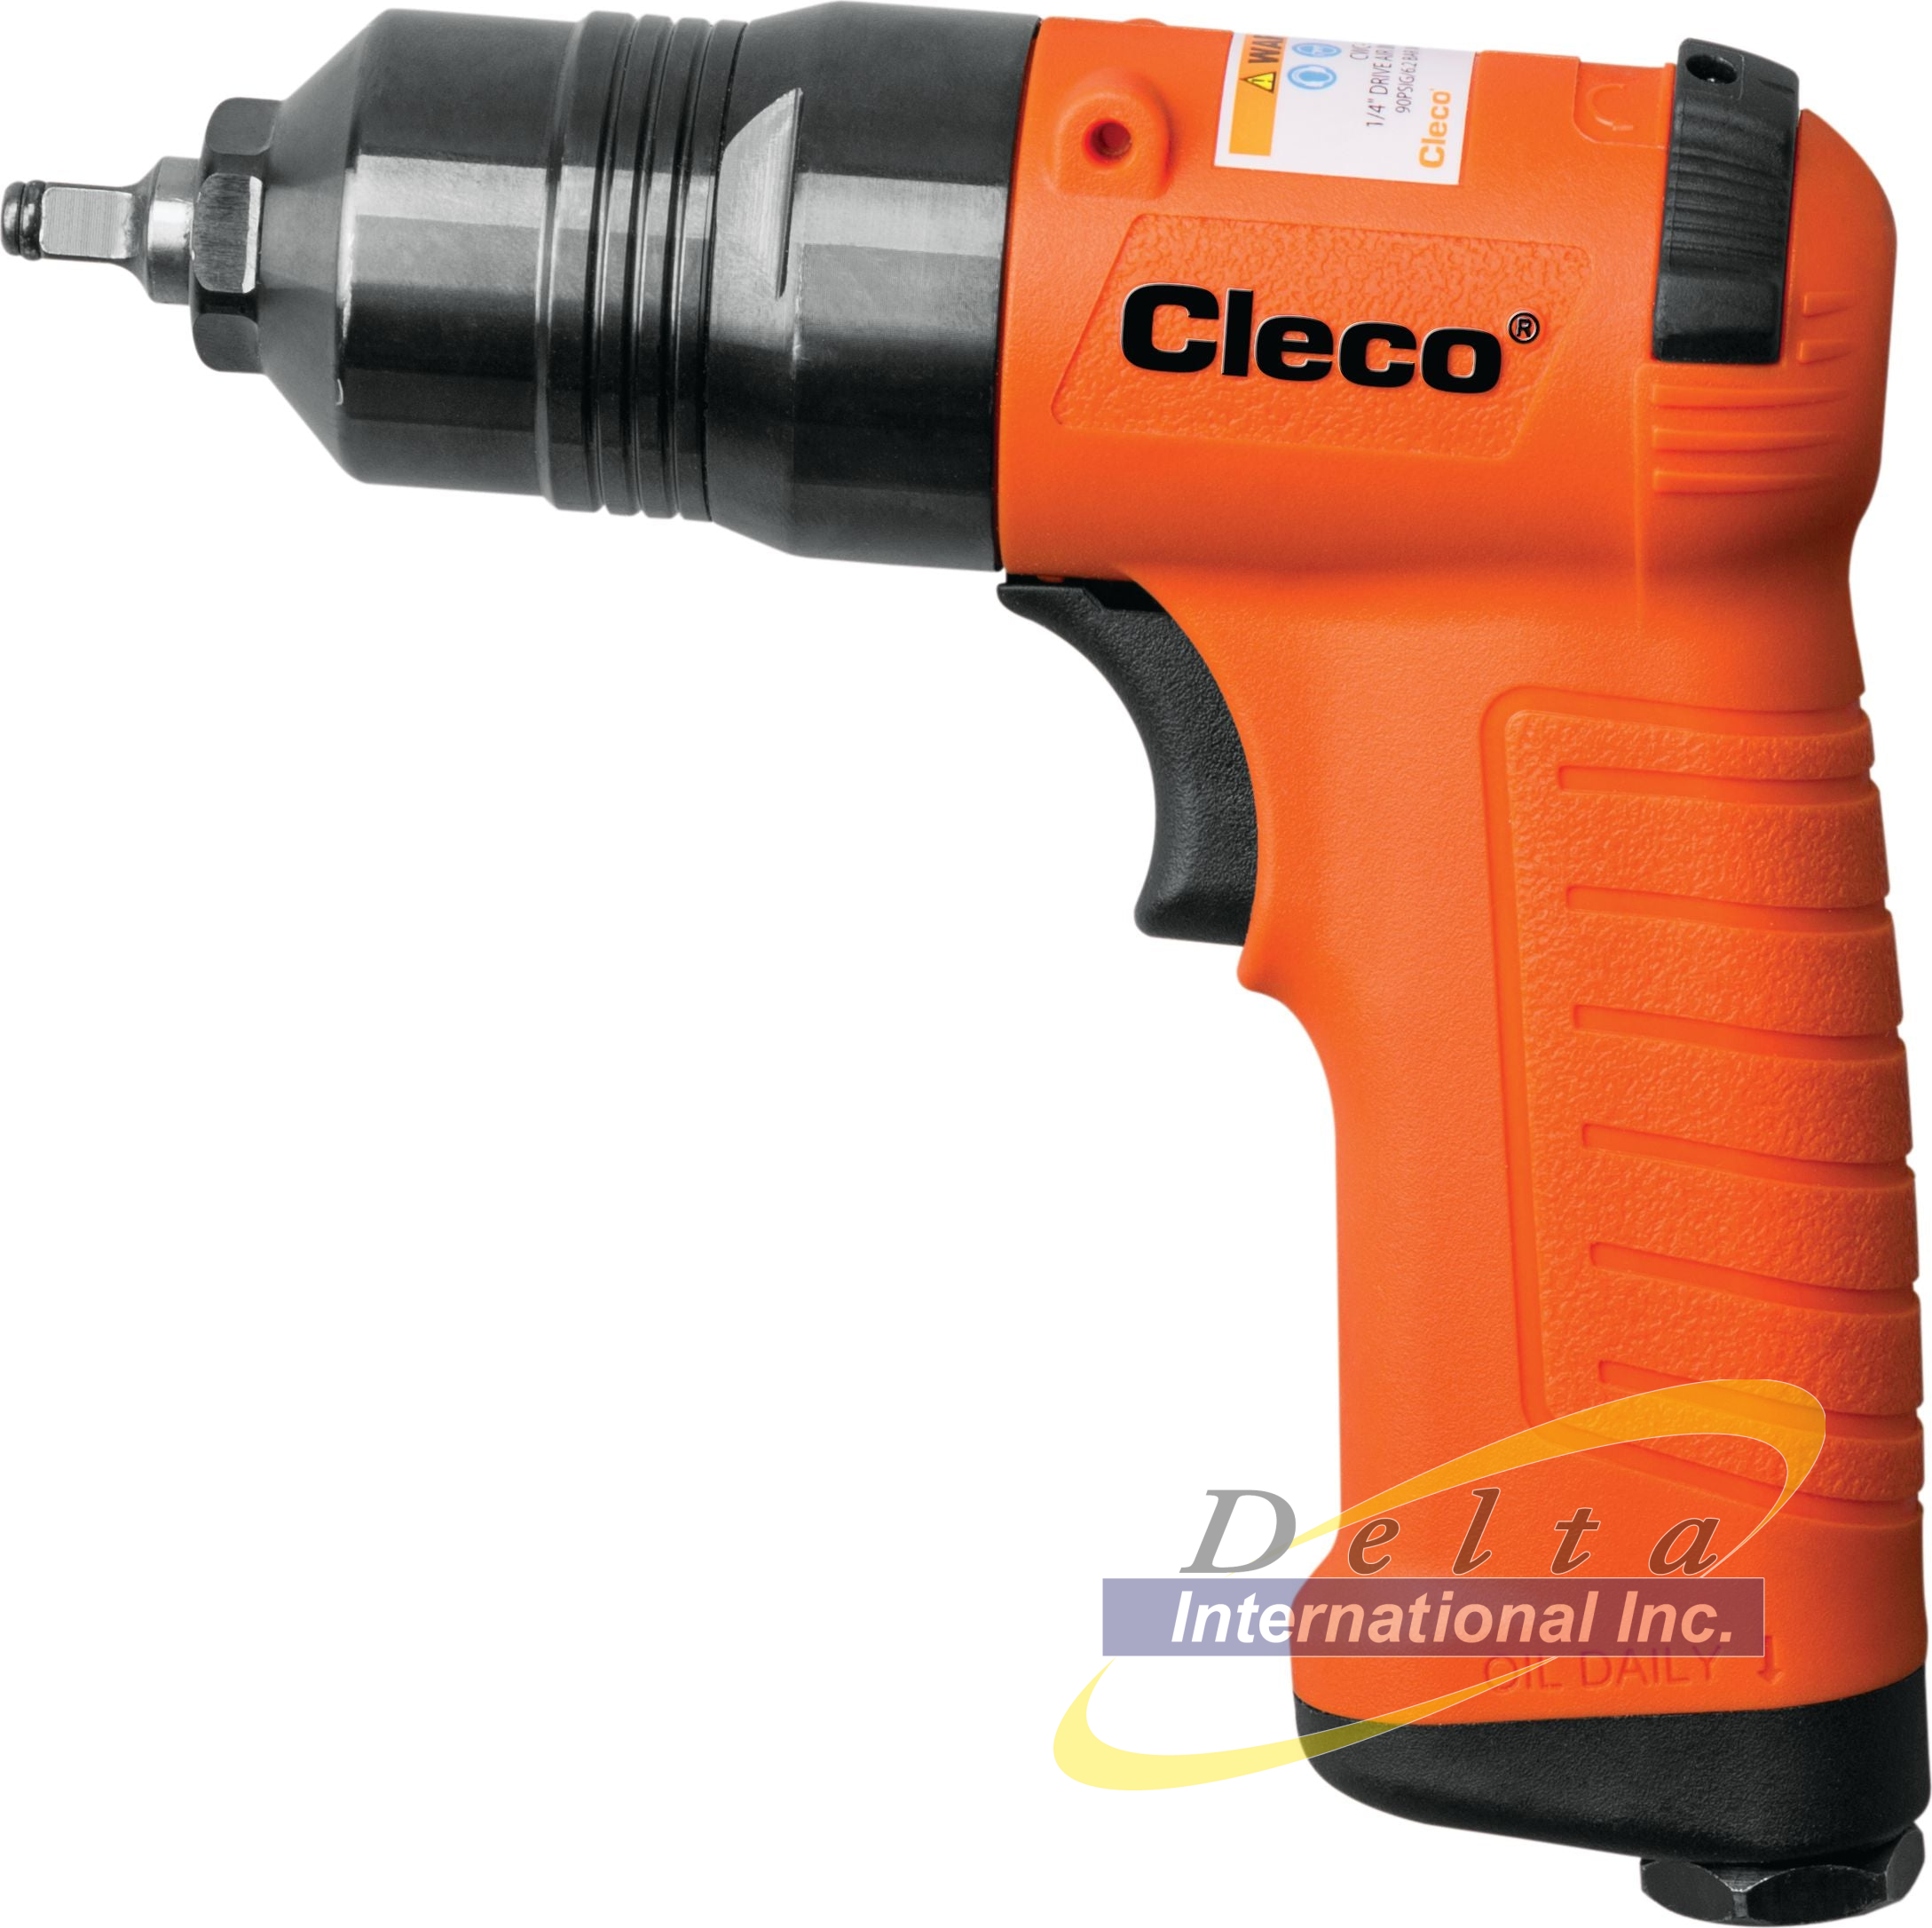 Cleco CWC-375R-4 - CWC Premium Composite Series Impact Wrench